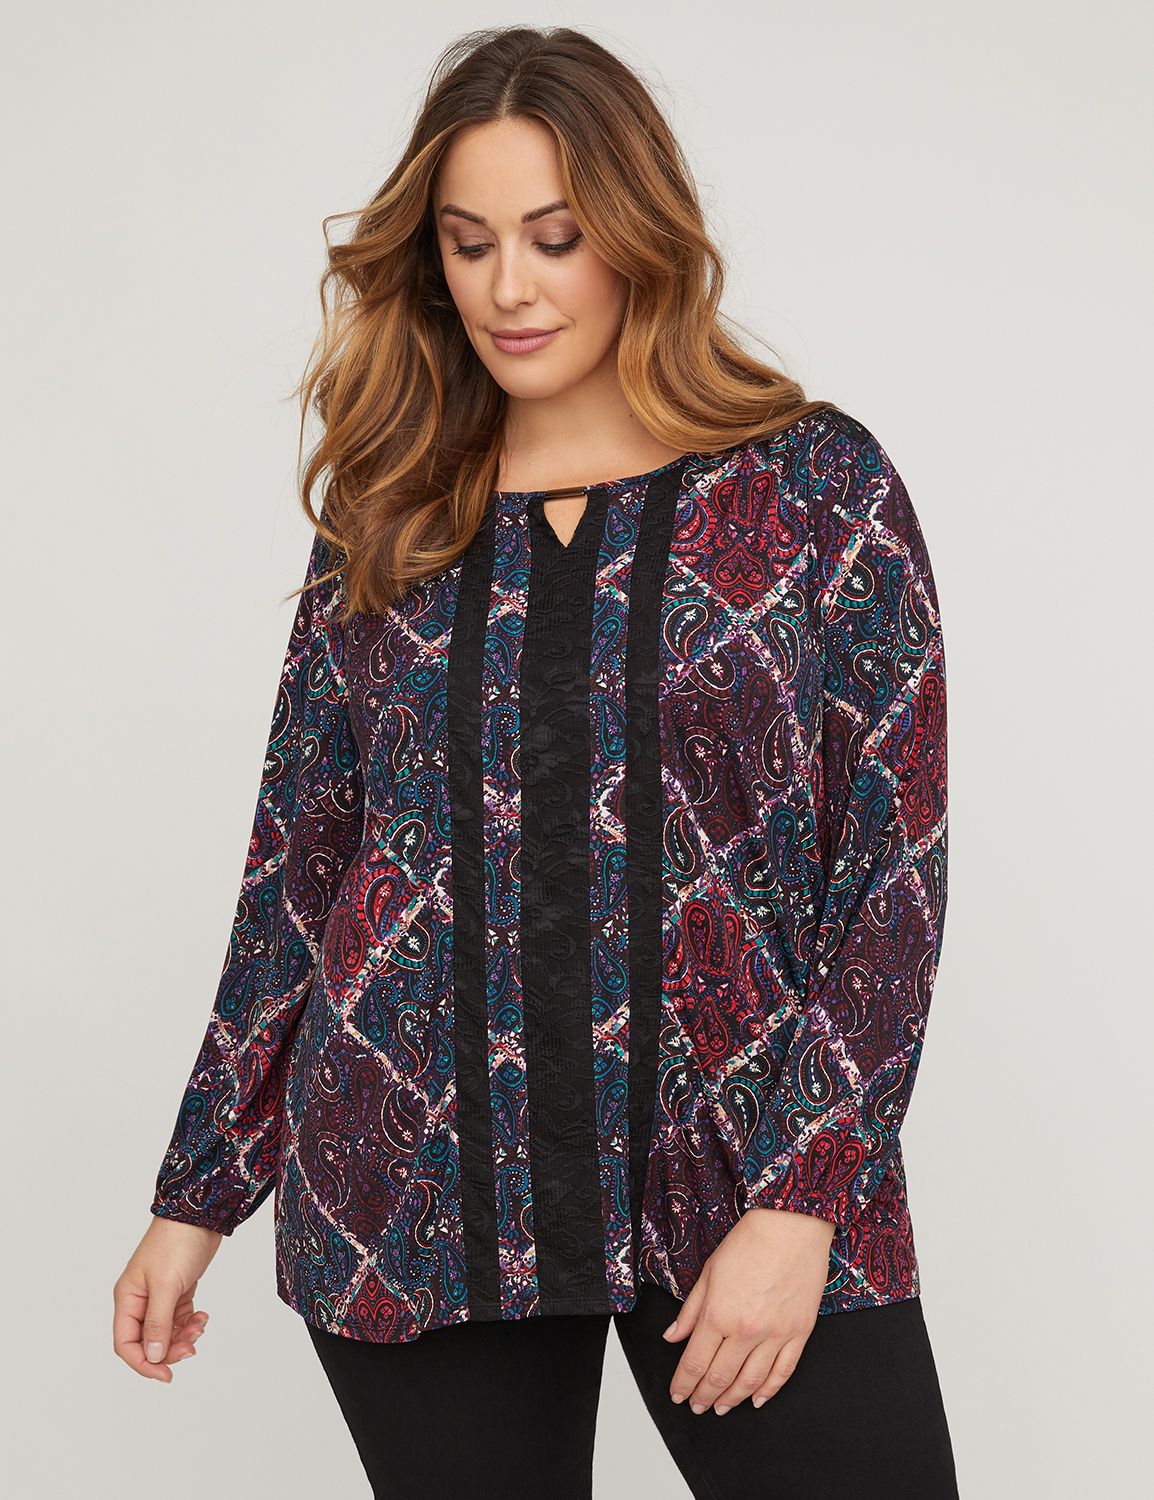 Plus Size Petite Clothes- Skirts, Pants, Formalwear And More | Catherines